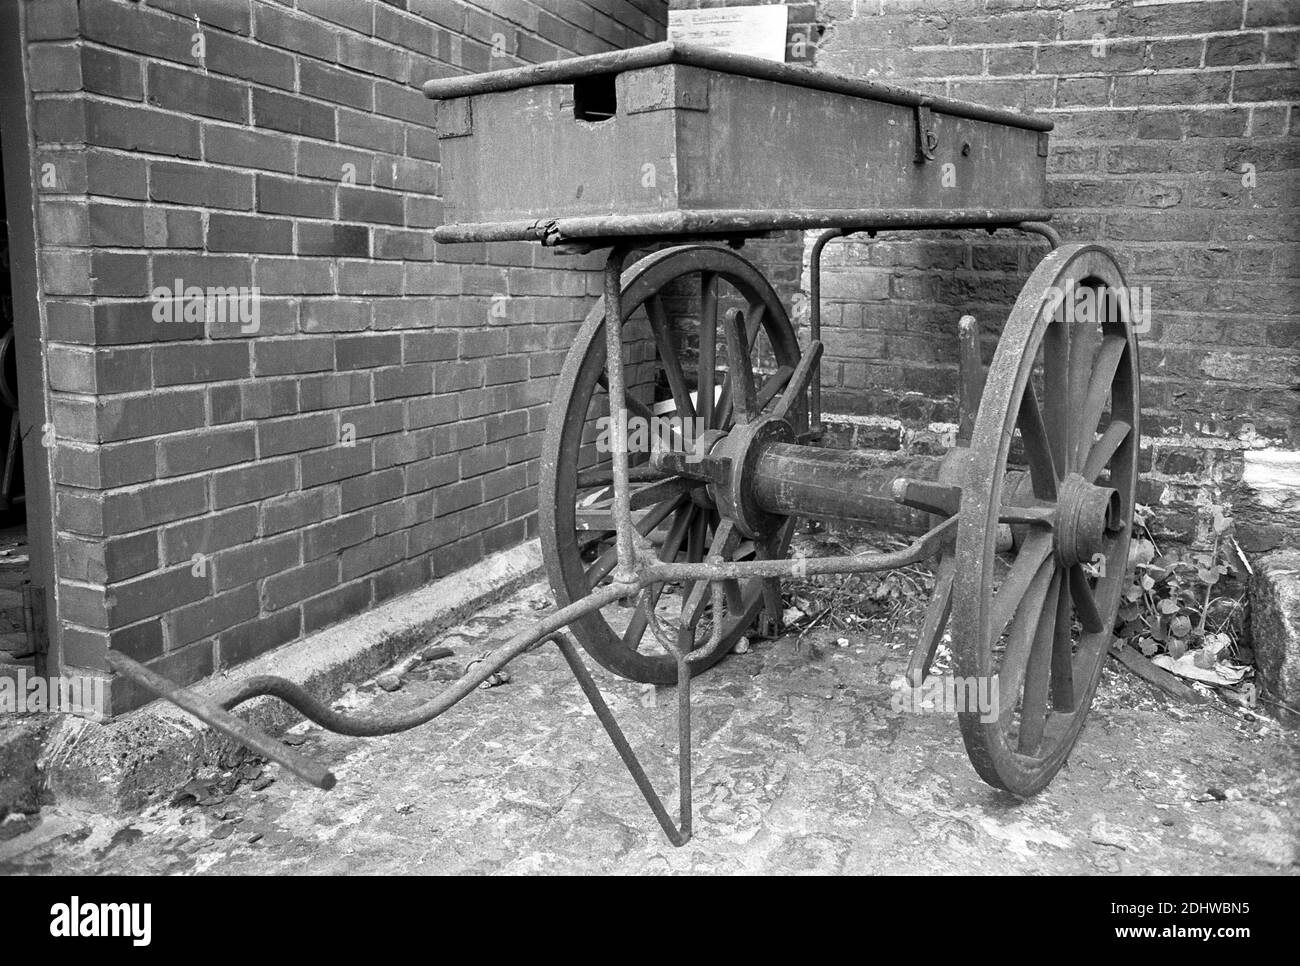 UK, London, Docklands, Isle of Dogs, shipping docks, early 1974. A firefighting handcart. The hose would be wrapped around the axle. Stock Photo